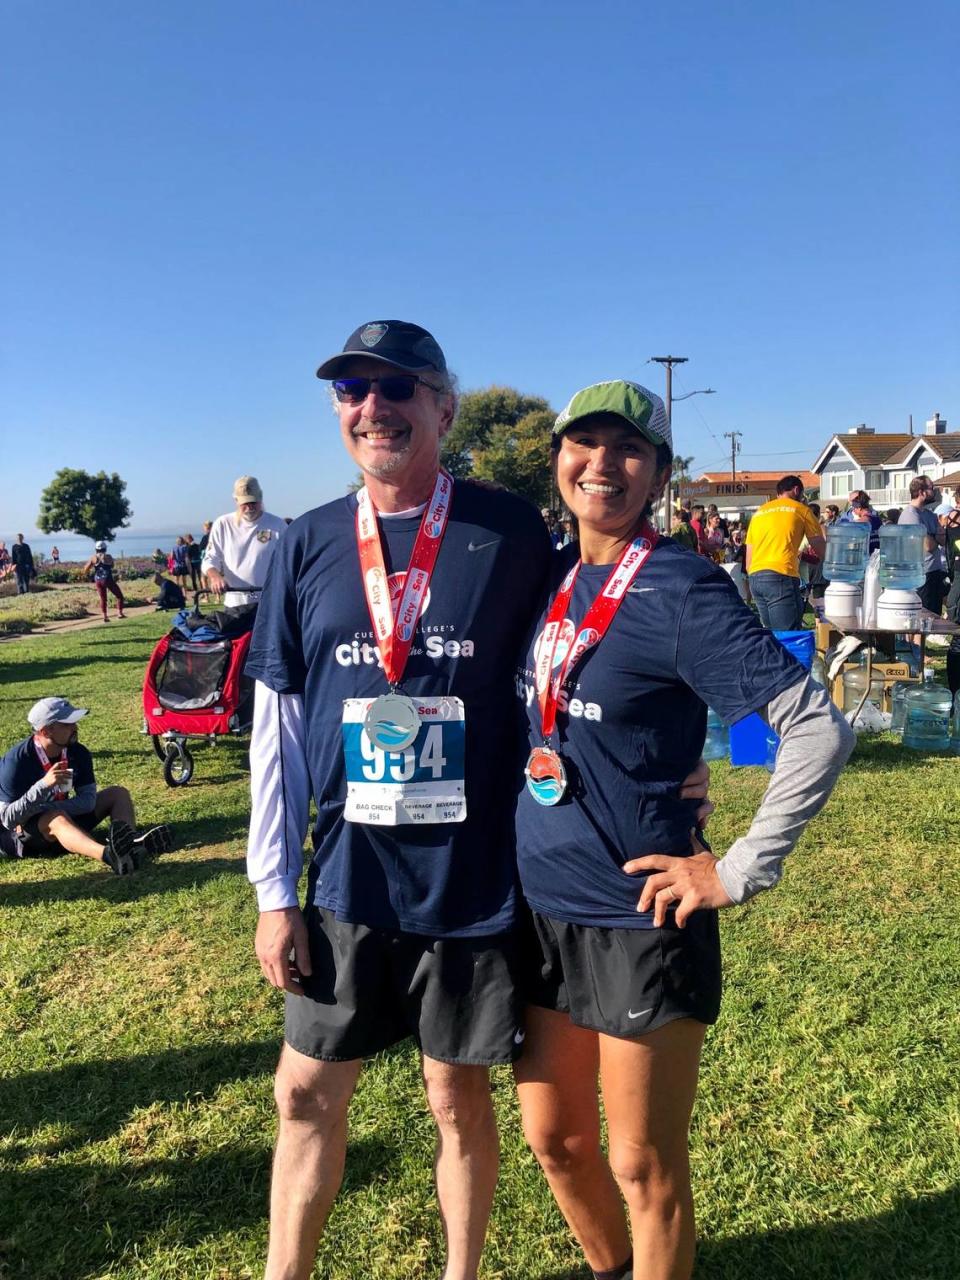 Nelly Caminada found a community through running in San Luis Obispo, she said. Here, she is pictured after running in SLO’s City to the Sea half marathon.